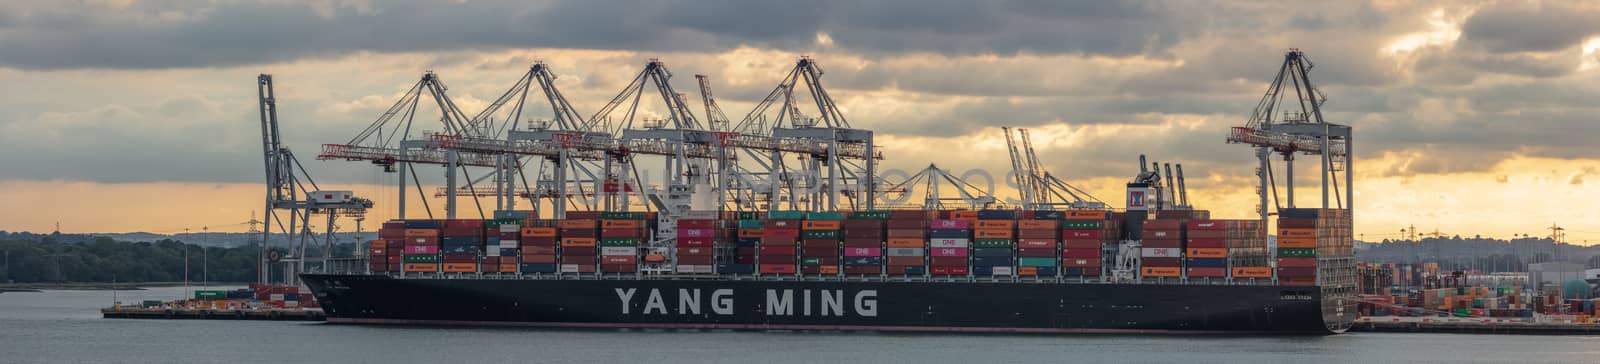 Southampton, UK - June 11, 2020: Panoramic aerial view of huge container ship Yang Ming being loaded with containers in the port of Southampton at sunset. Golden hour.